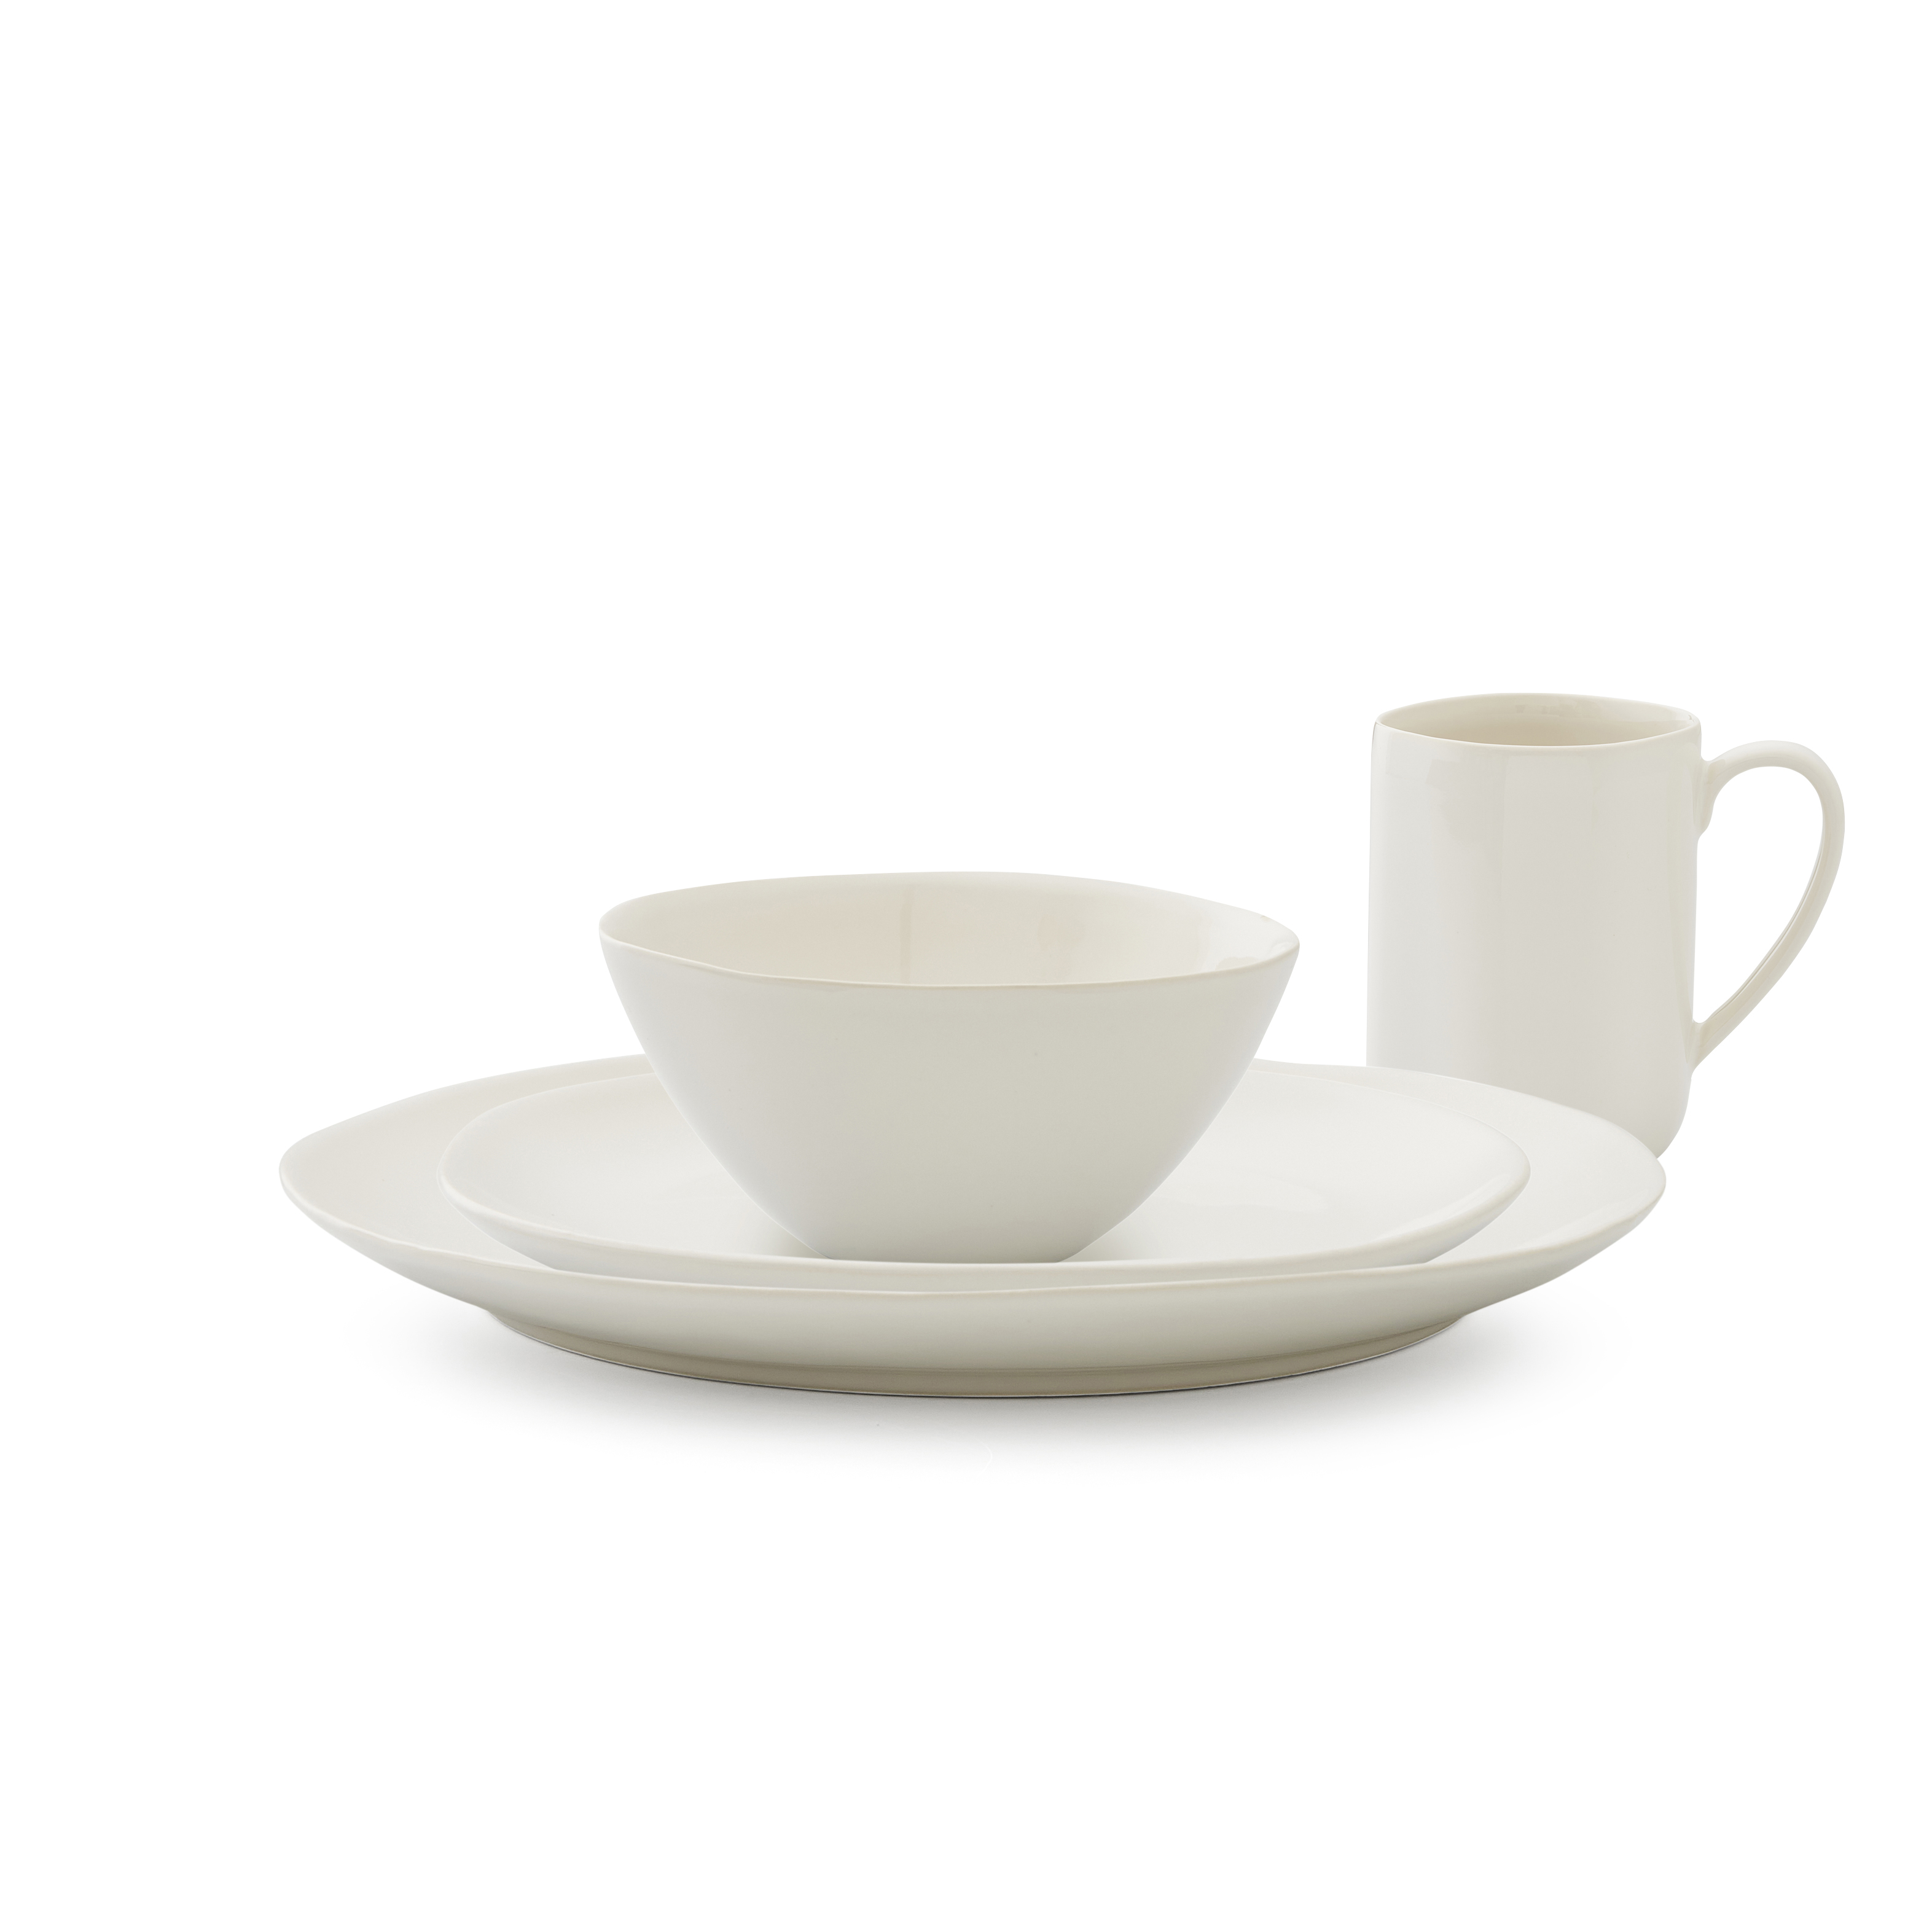 Sophie Conran Arbor 4 Piece Place Setting- Creamy White image number null